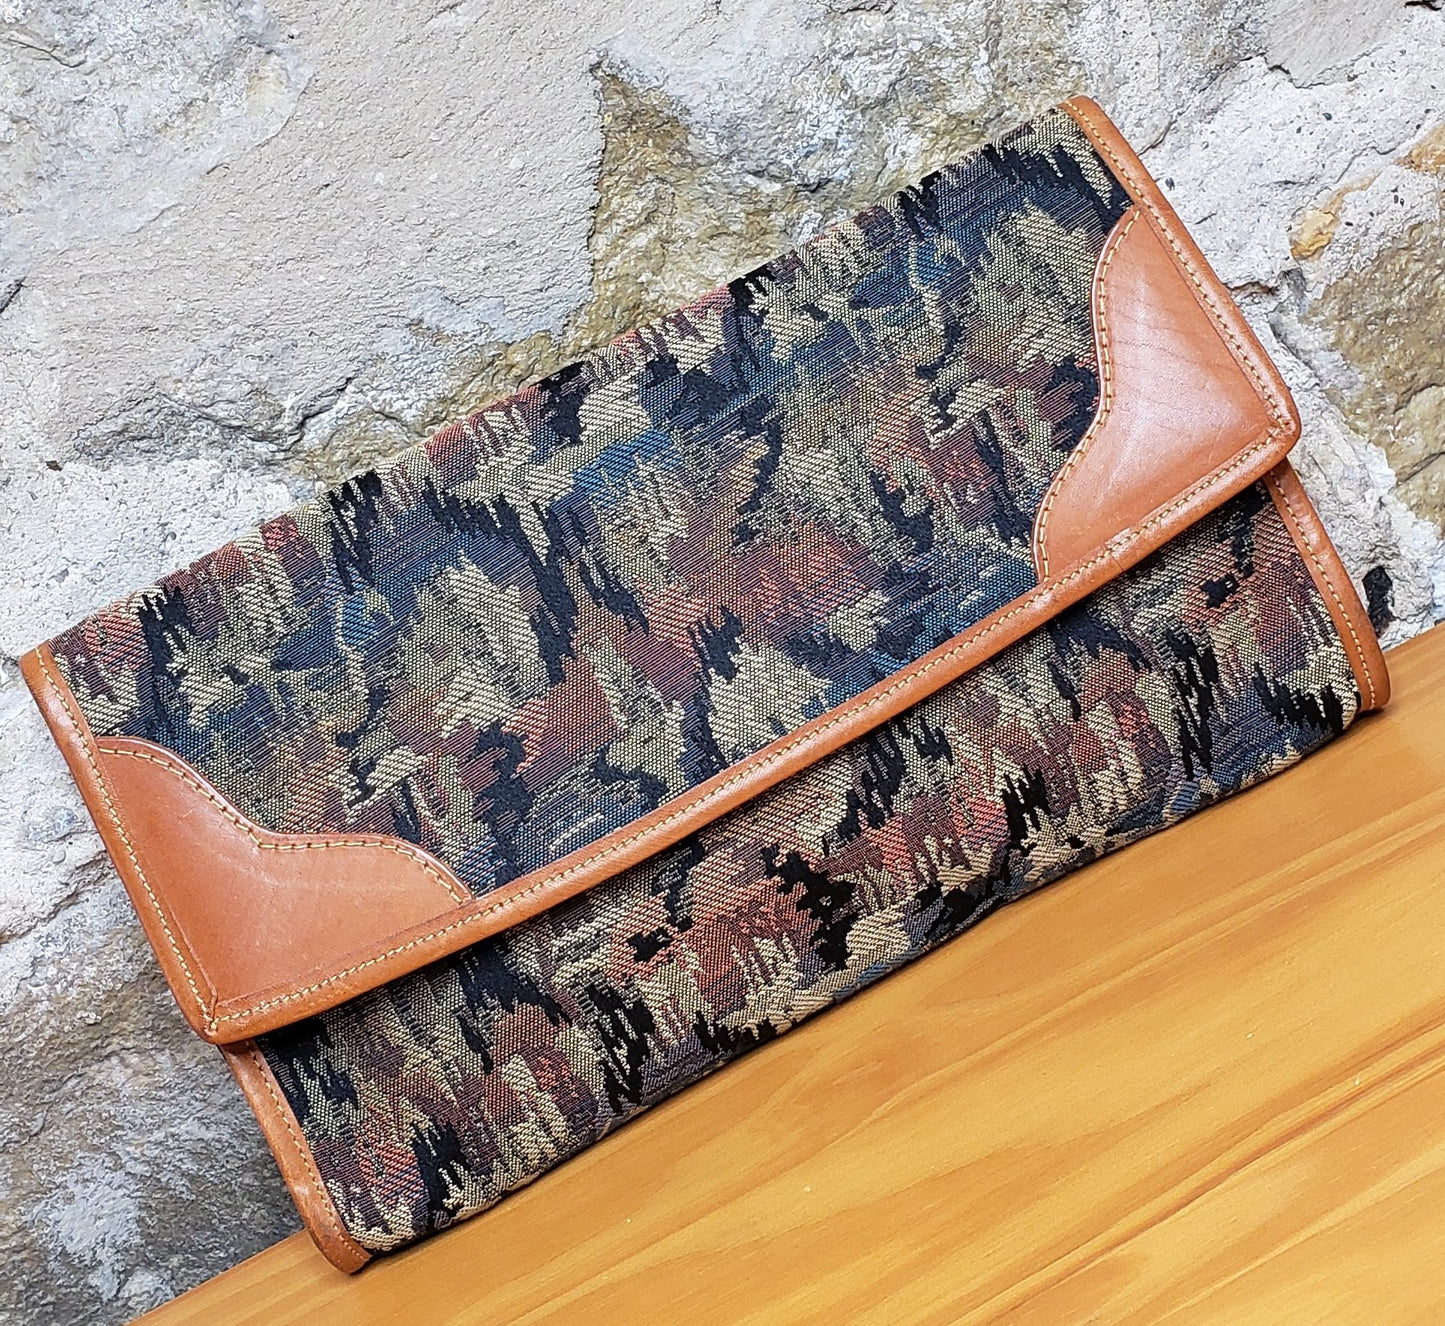 Vintage Tan Leather and Fabric Clutch